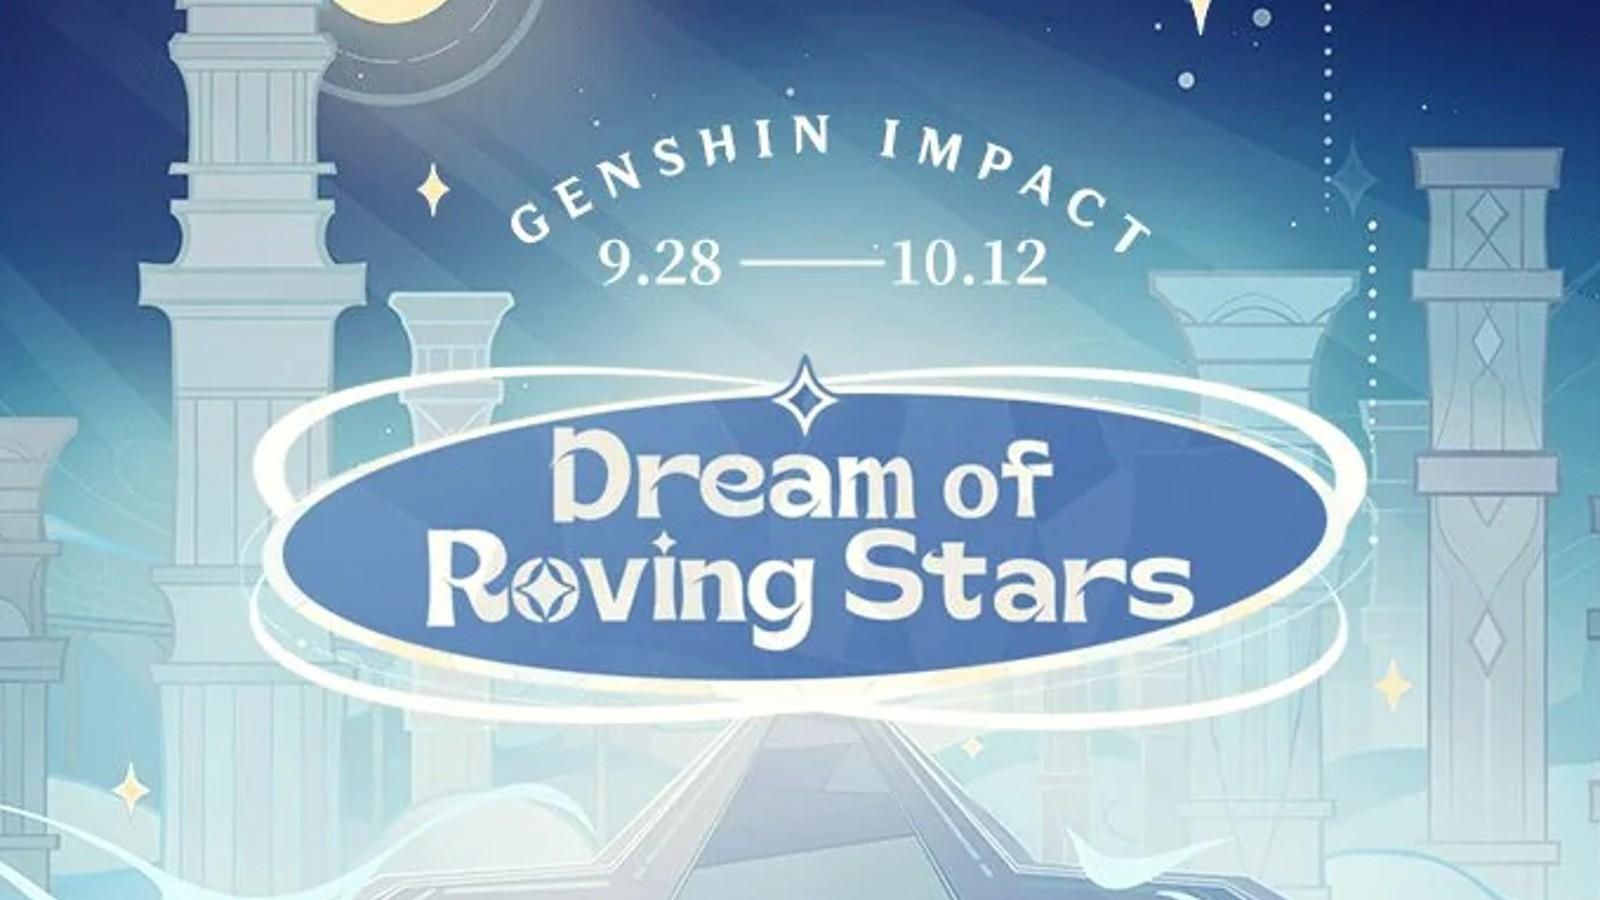 An image of the Dream of Roving Stars logo in Genshin Impact.